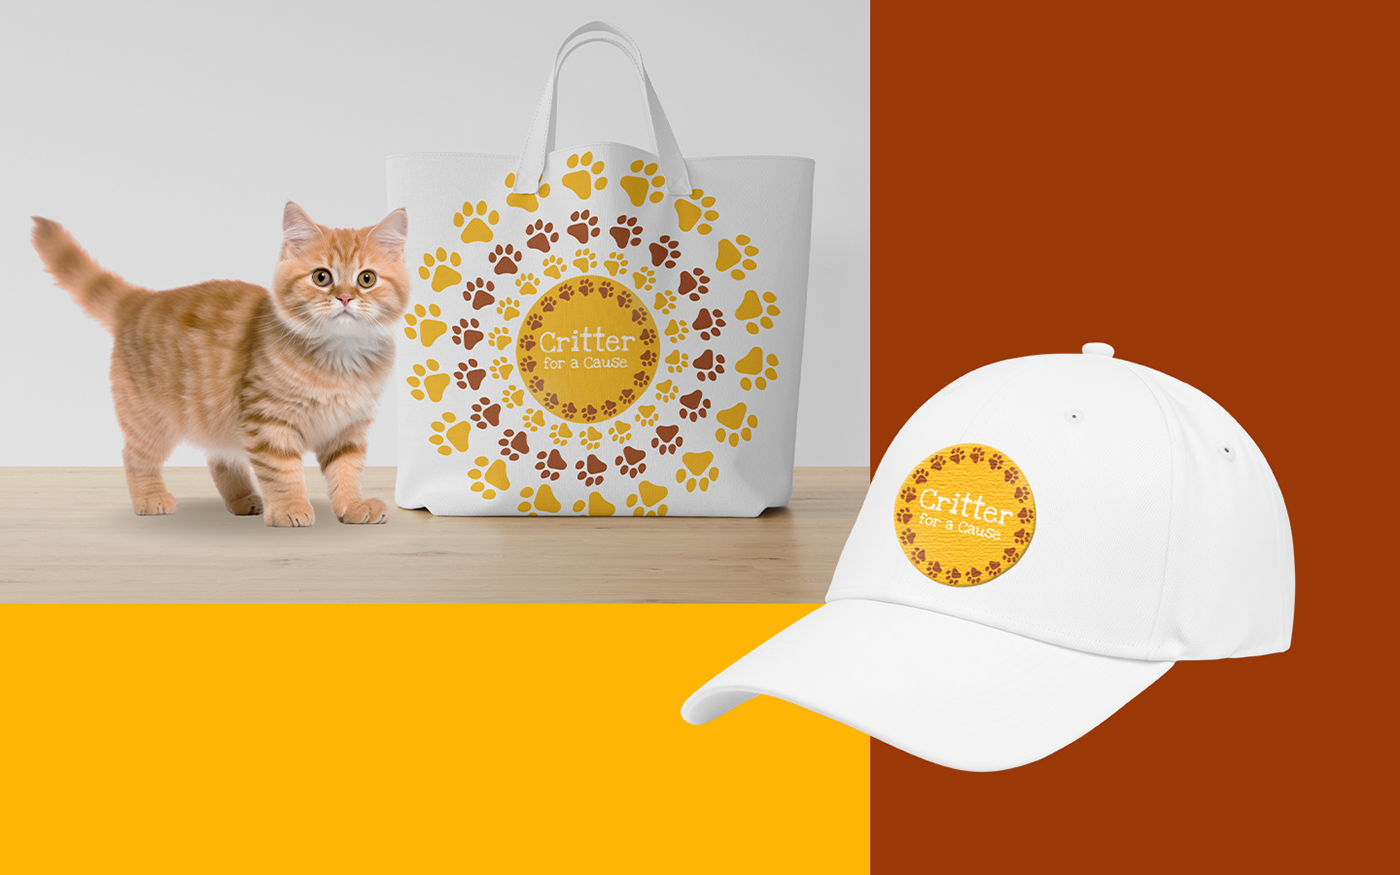 cat next to Critter for a Cause tote bag and baseball hat